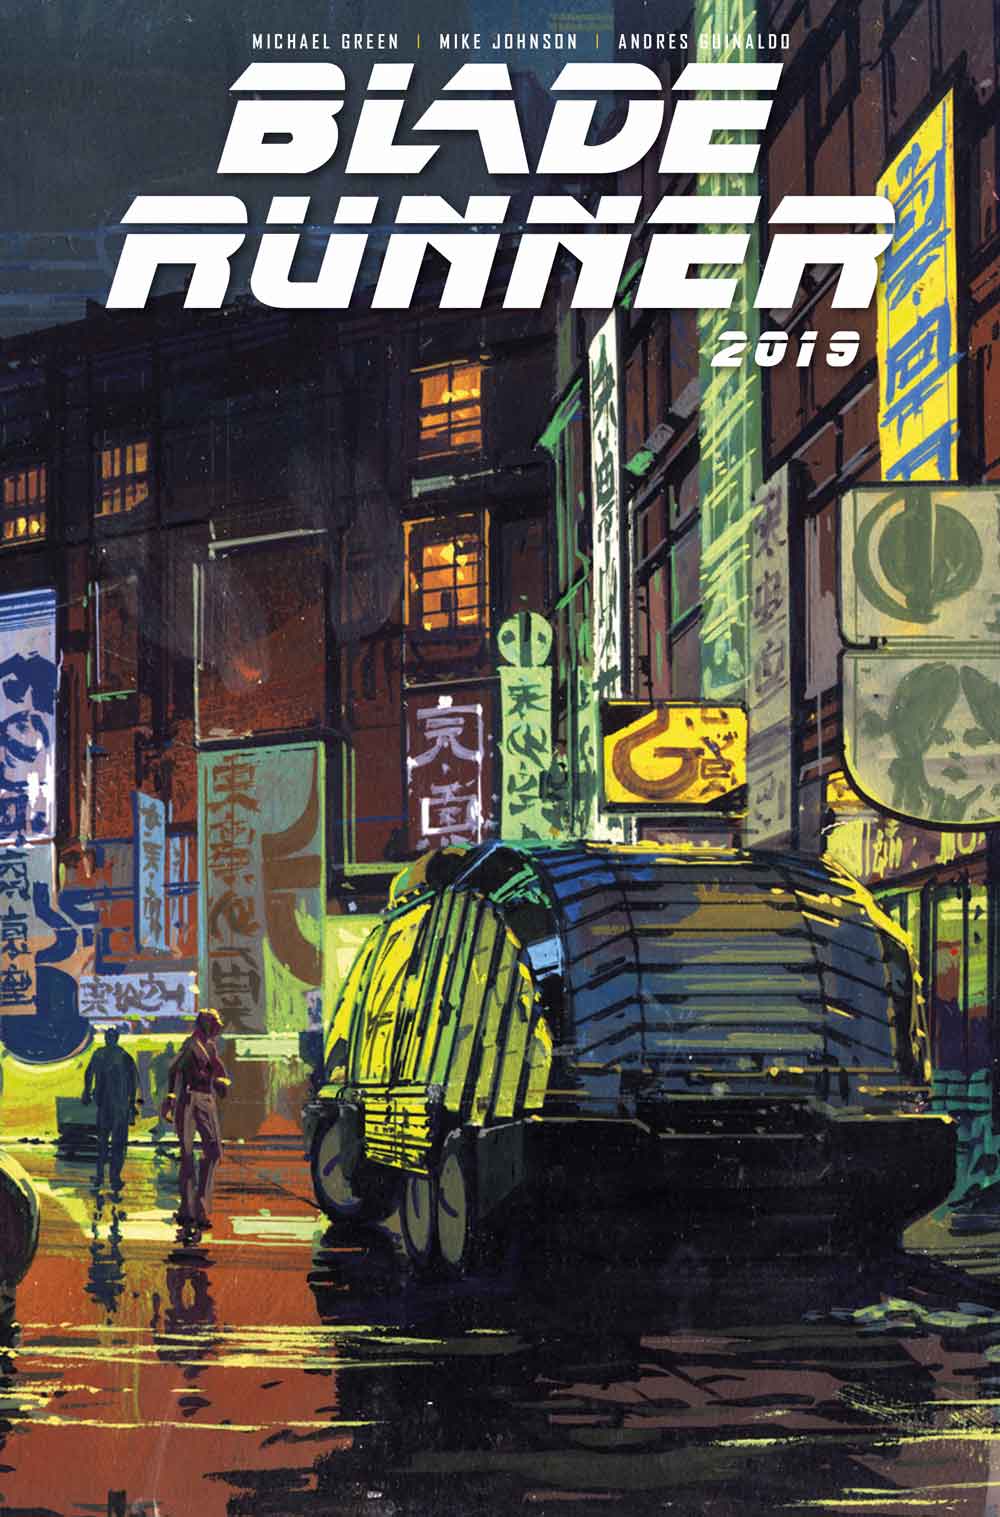 Blade Runner 2019 #1 Cover B - Syd Mead (Not Final)